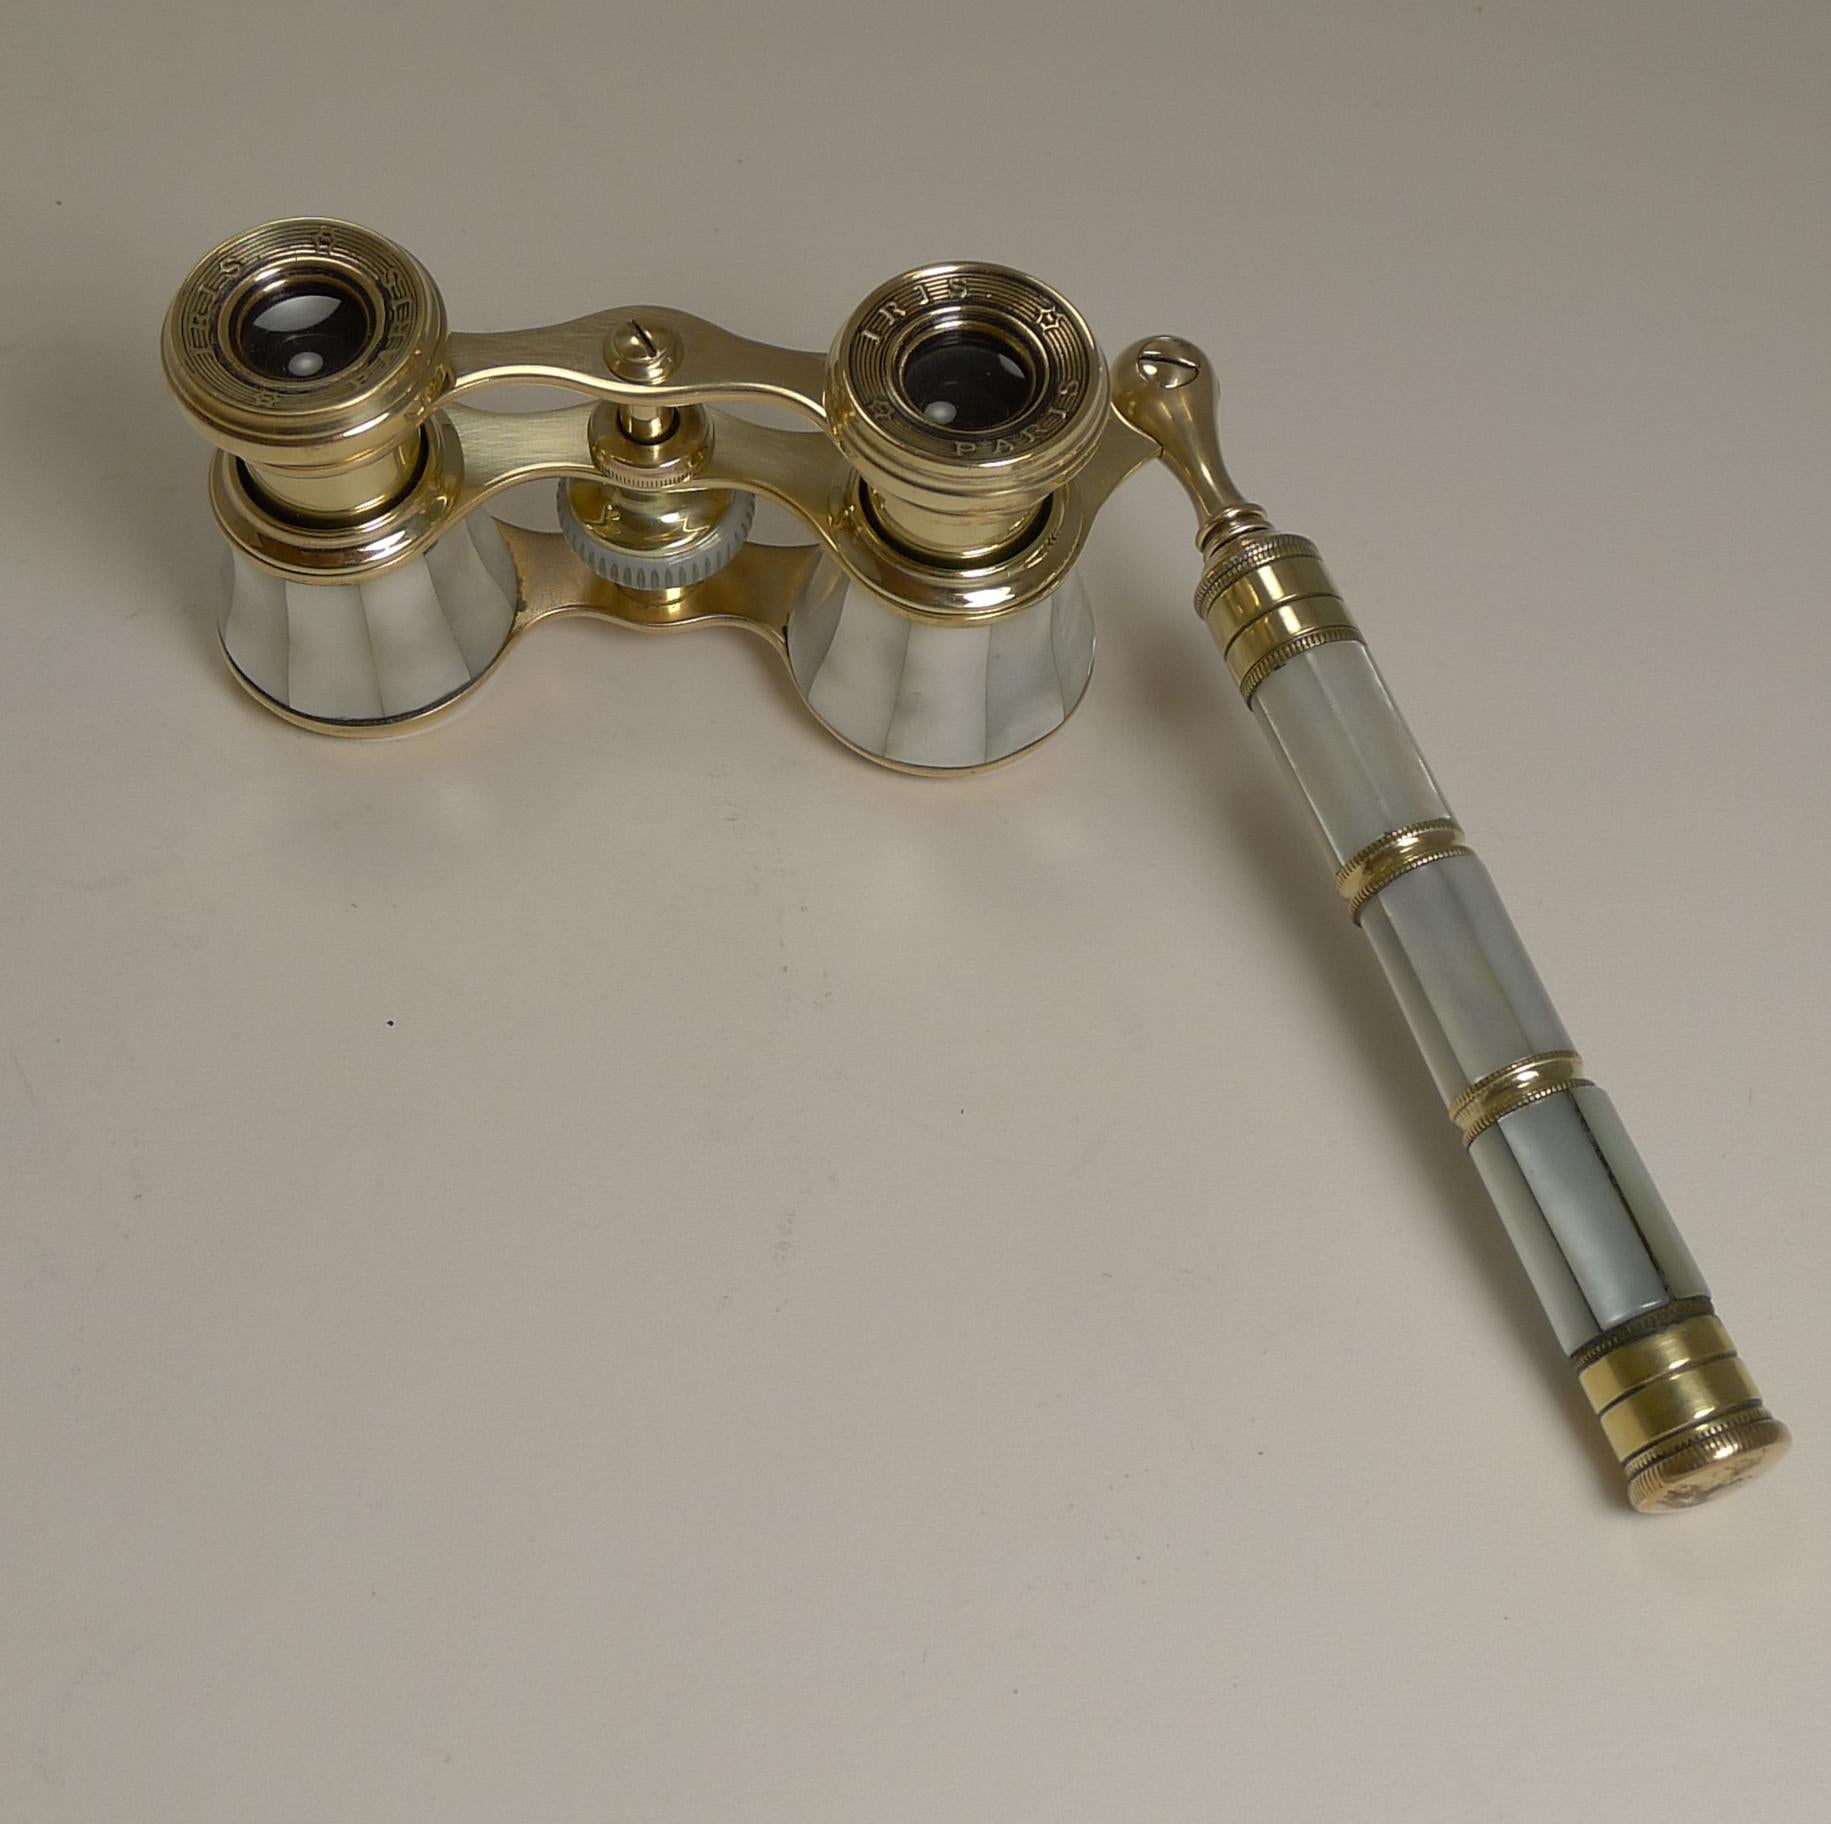 A stunning pair of late Victorian or Edwardian Opera glasses dating to the turn of the century, circa 1900. French in origin, each eye piece is signed, Iris, Paris.

The telescopic lorgnette handle extends from 5